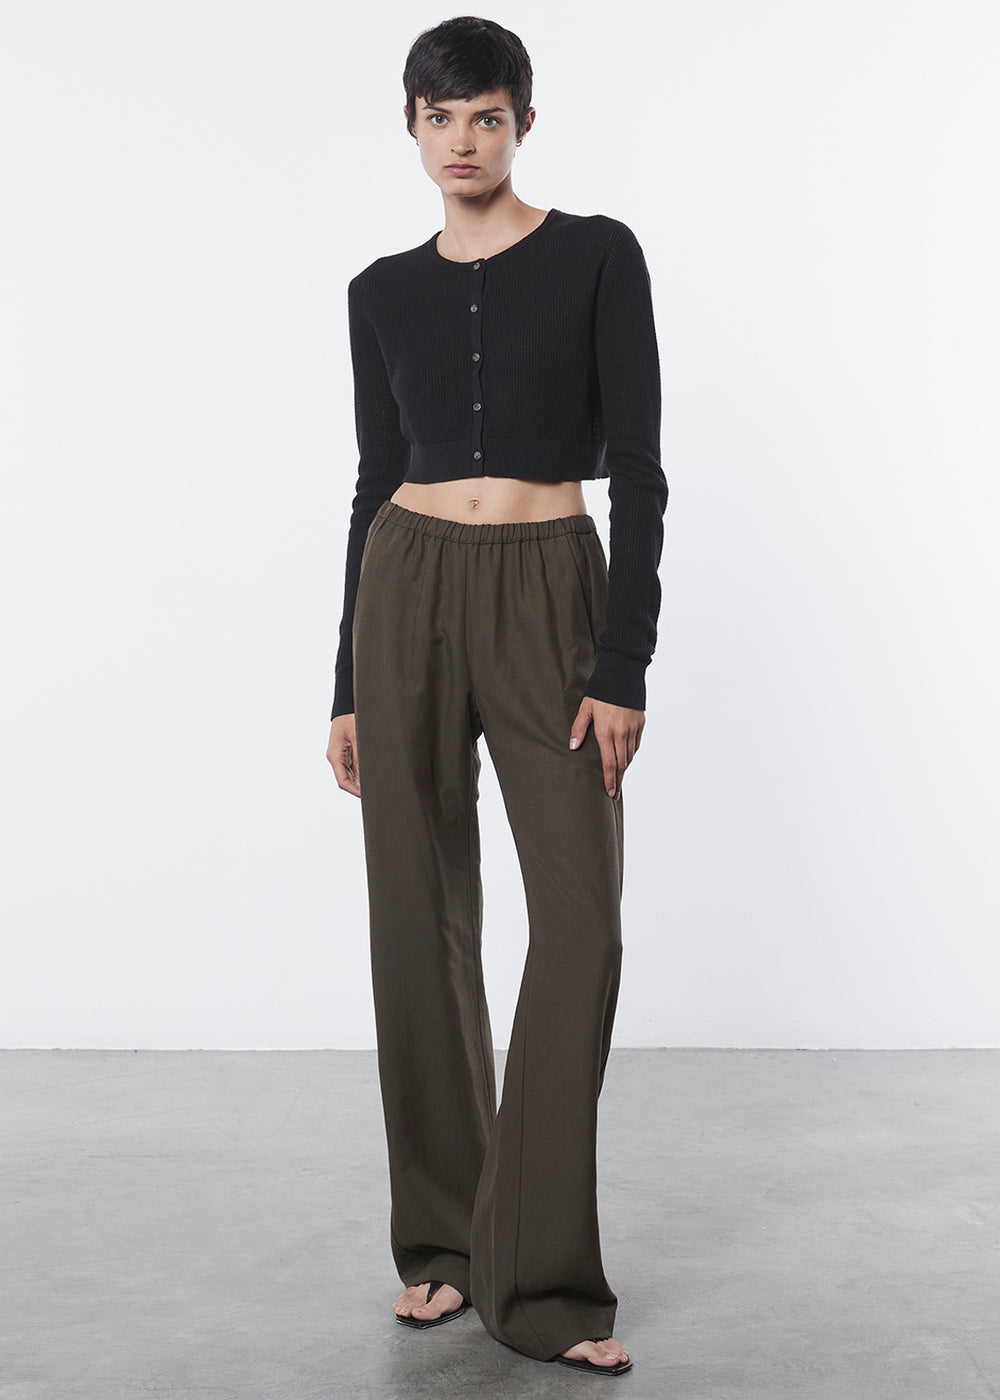 Enza Costa - Women - Military Twill Everywhere Pant